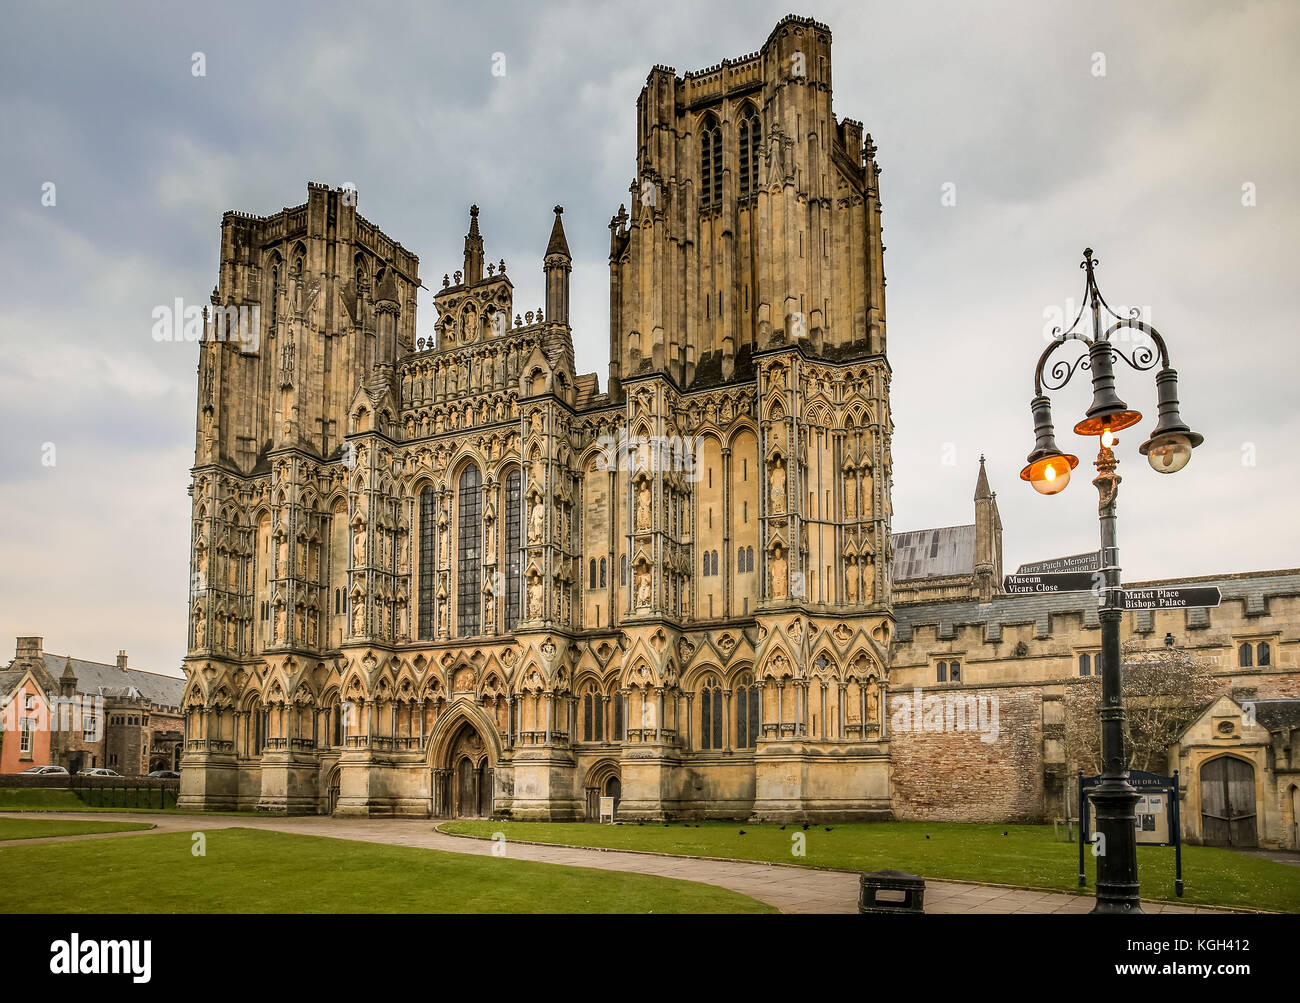 The facade of Wells Cathedral in early evening light Stock Photo